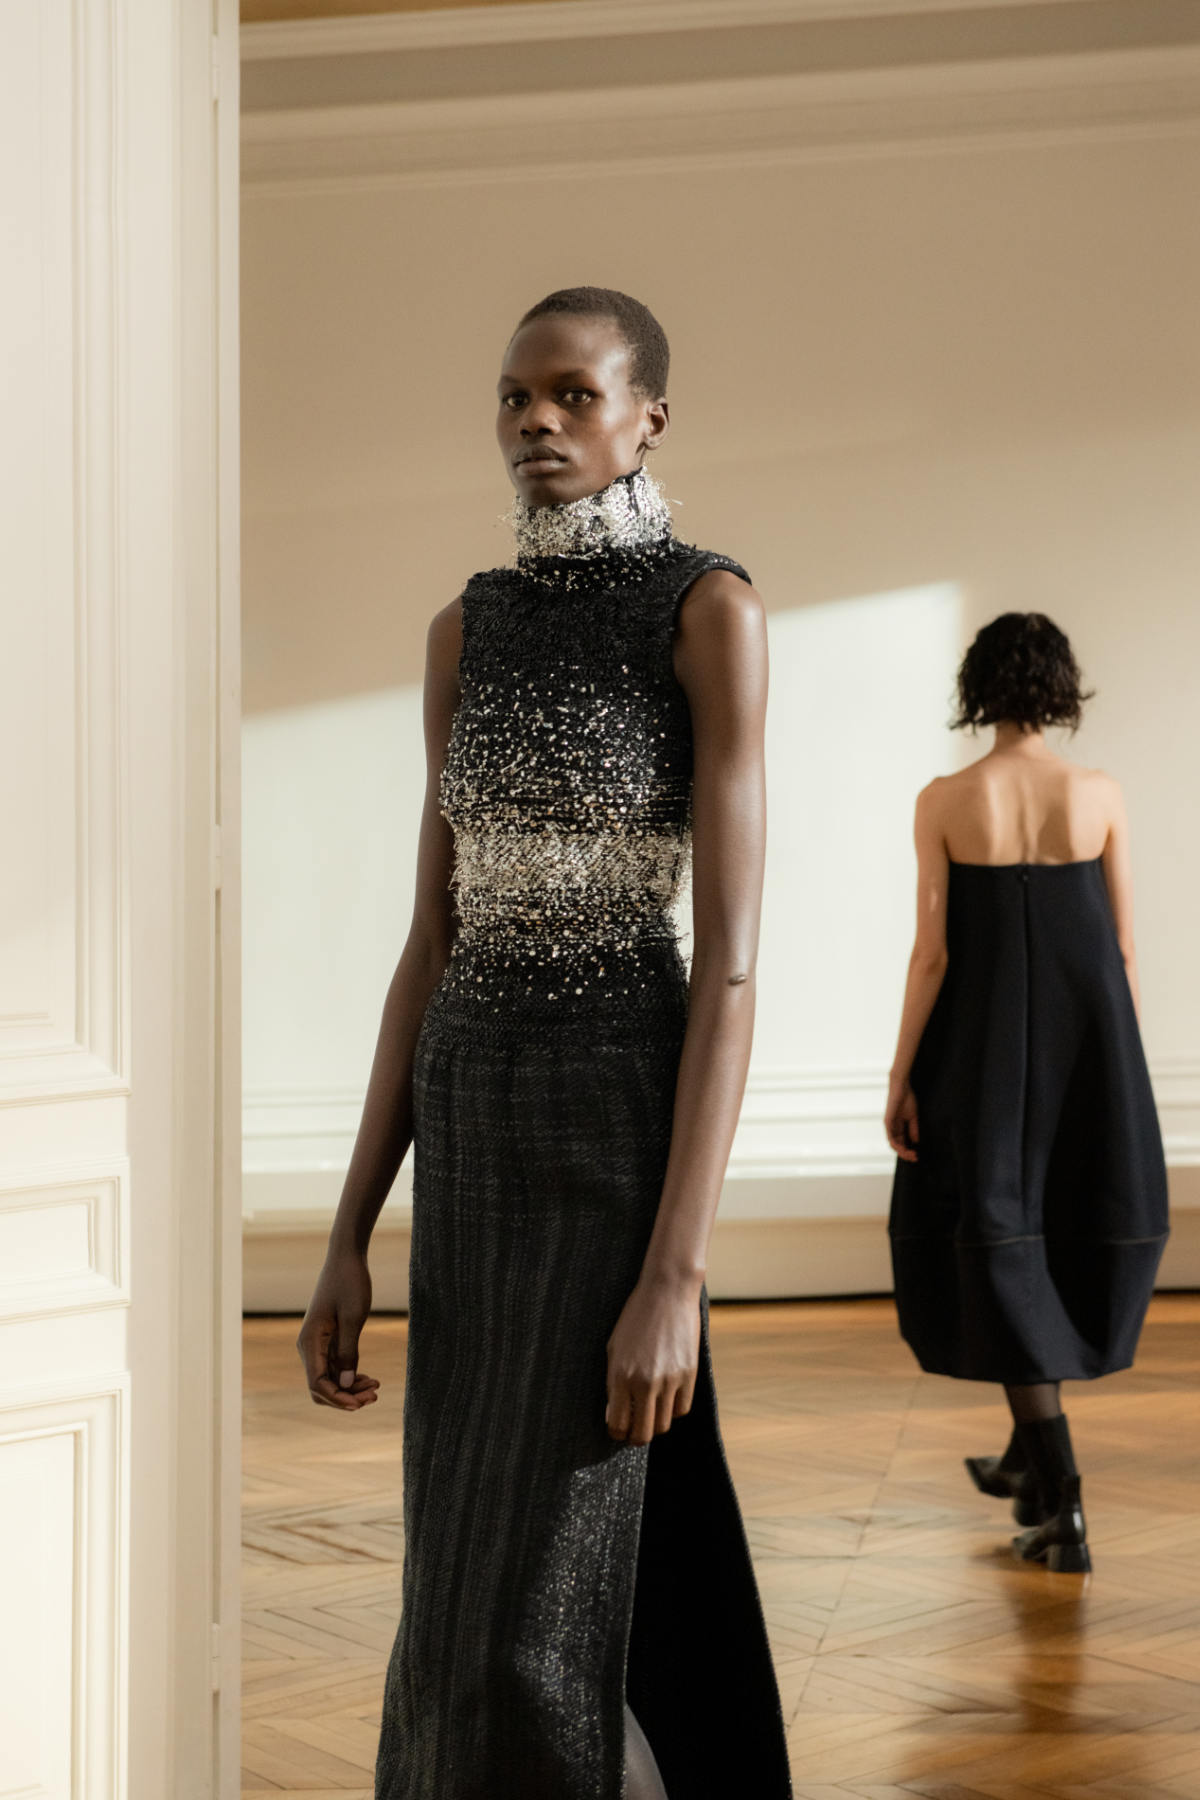 Maison Rabih Kayrouz Presents Its New Haute Couture Spring Summer 2023 Collection